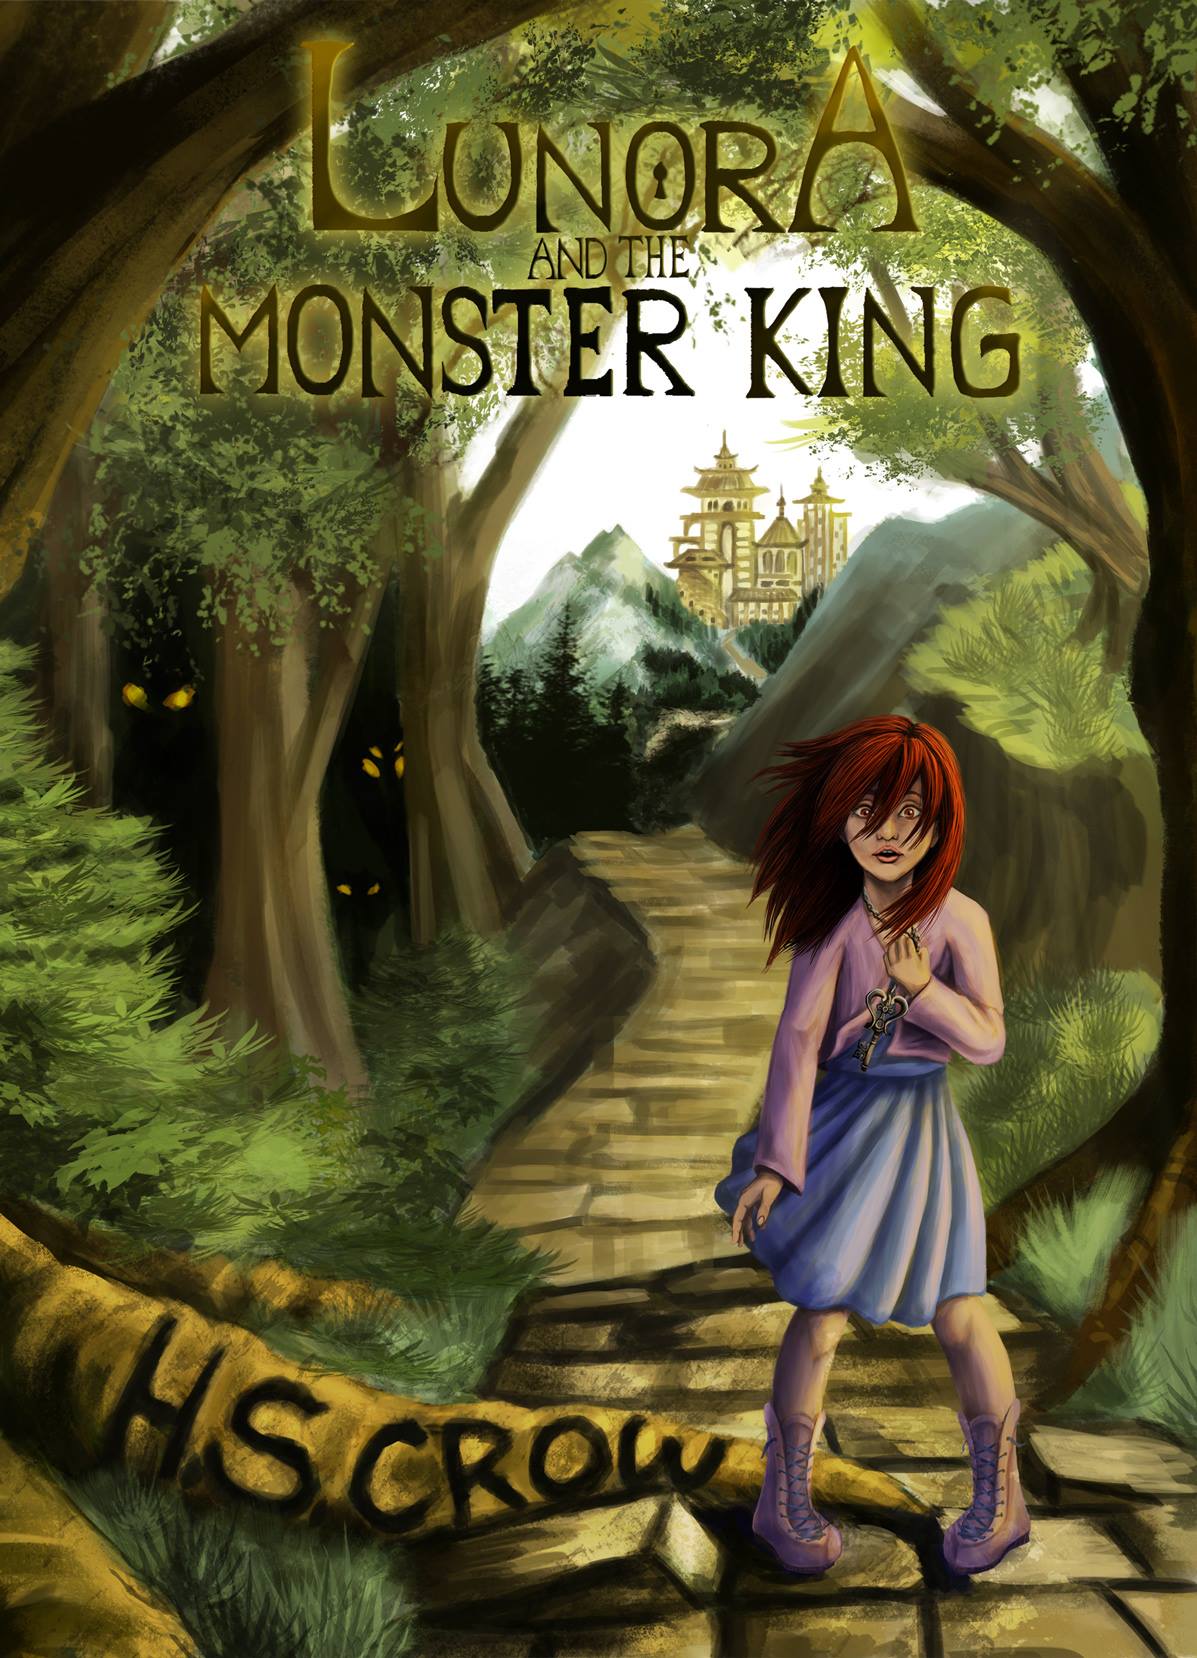 FREE: Lunora and the Monster King by H.S. Crow